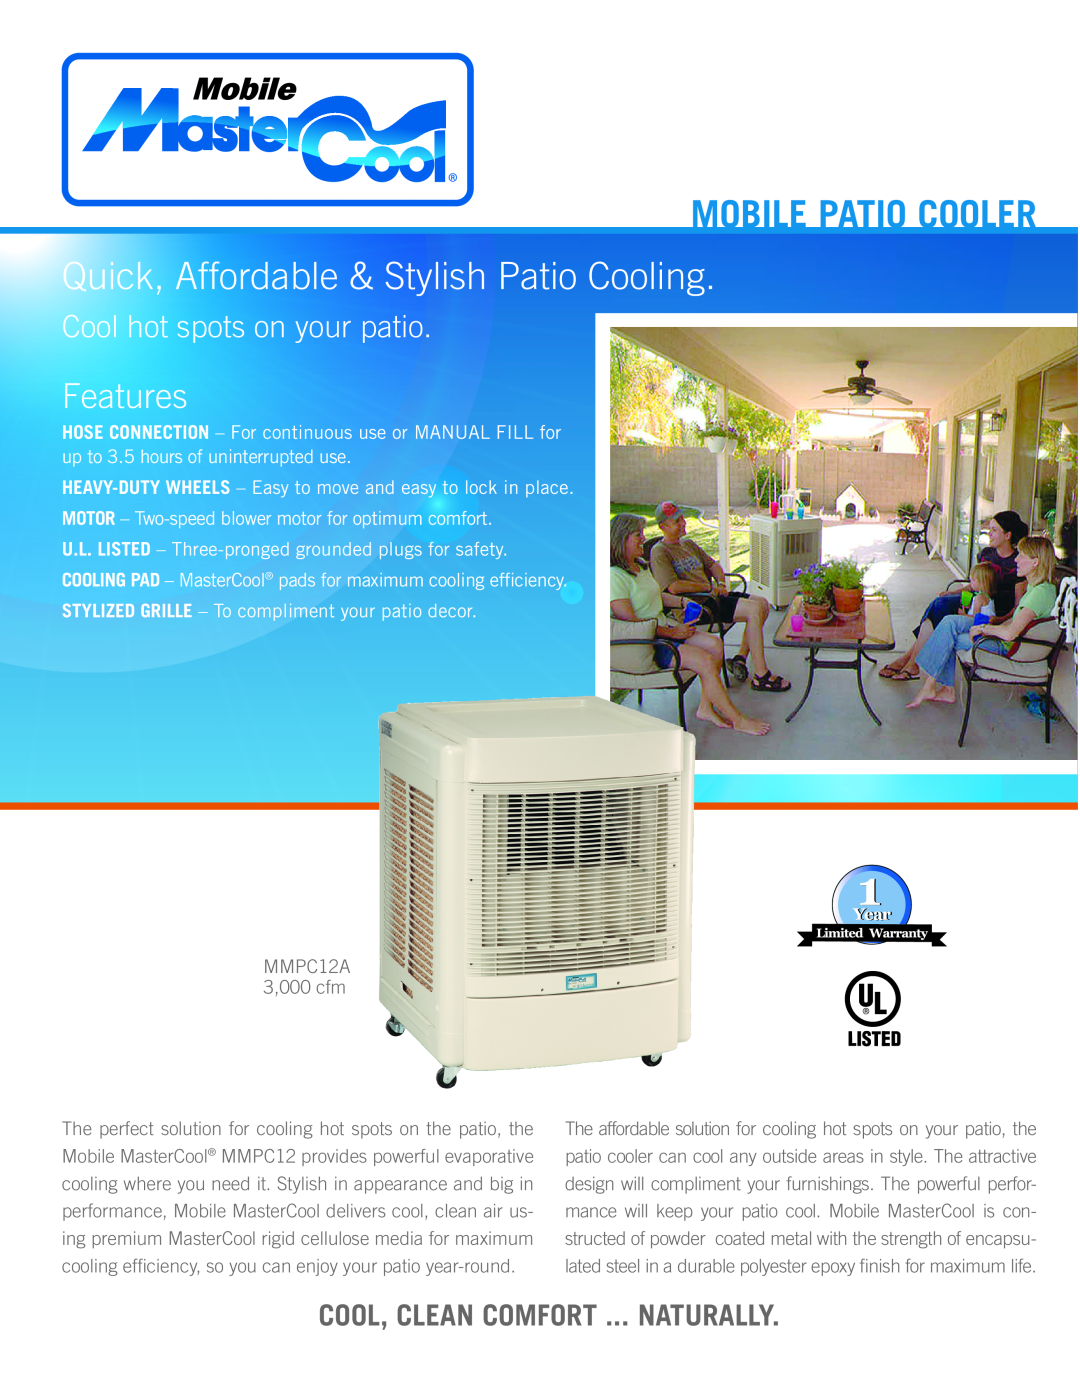 AdobeAir manual Features, Mobile Patio Cooler, Quick, Affordable & Stylish Patio Cooling, MMPC12A 3,000 cfm 